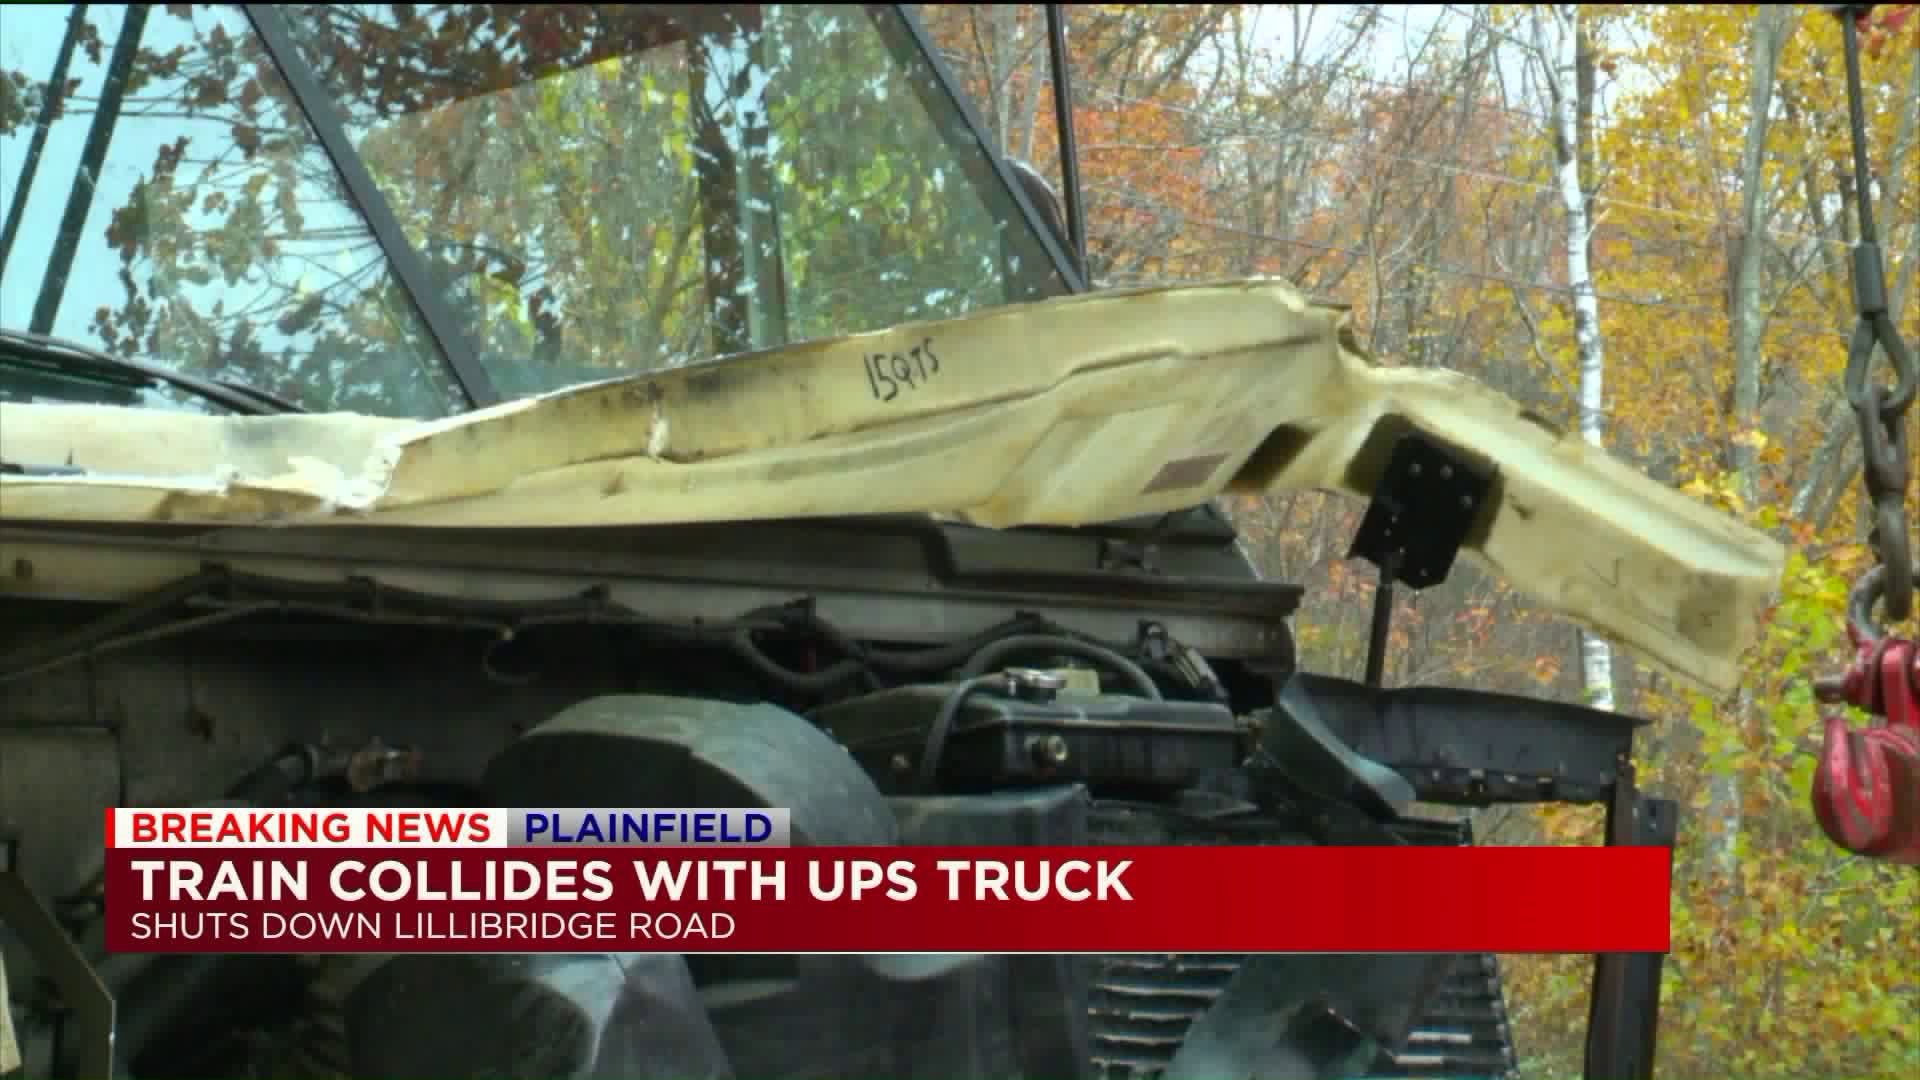 UPS truck struck by train in Plainfield, CT